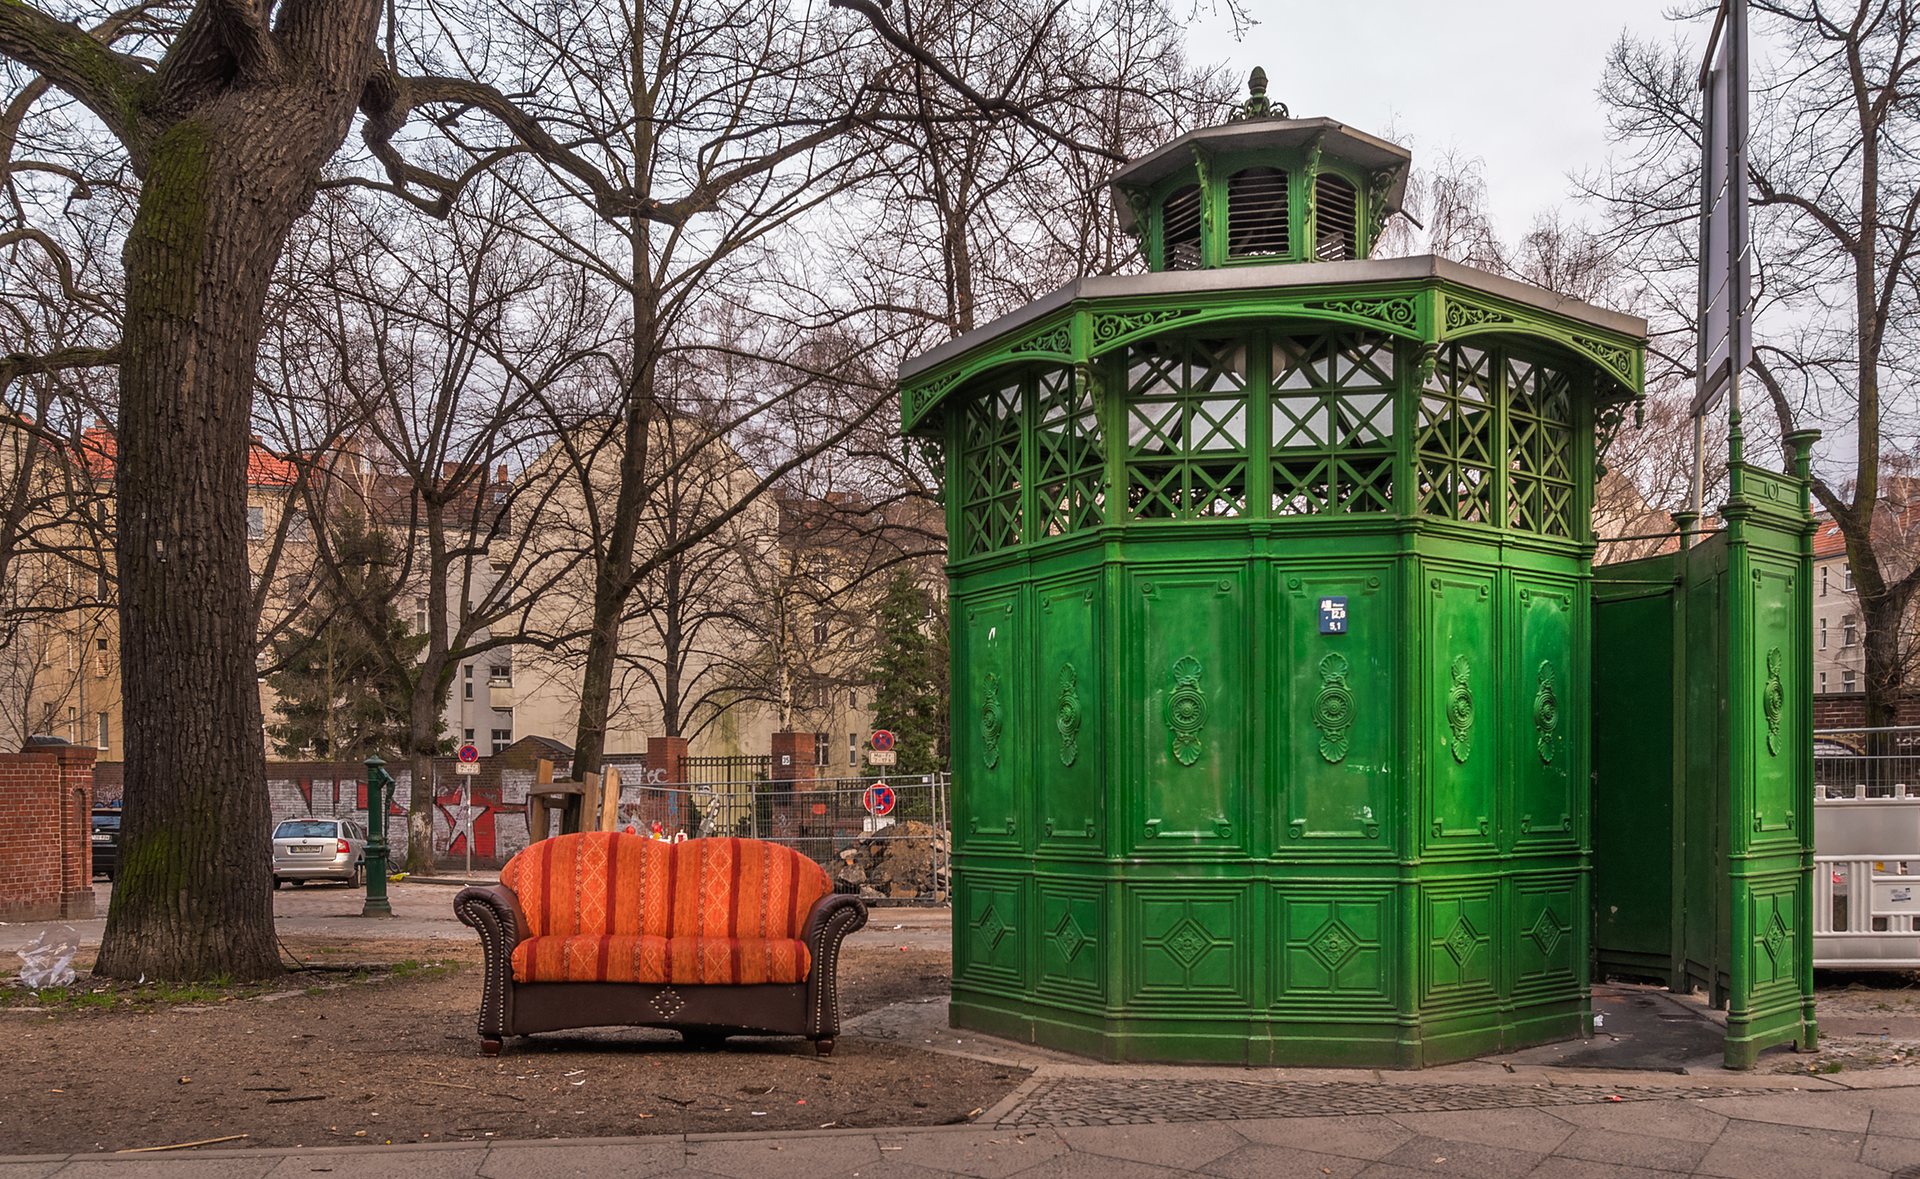 Public urinals in Berlin erected in the late 19th century. Only a few of these survived after the war and redevelopment works 